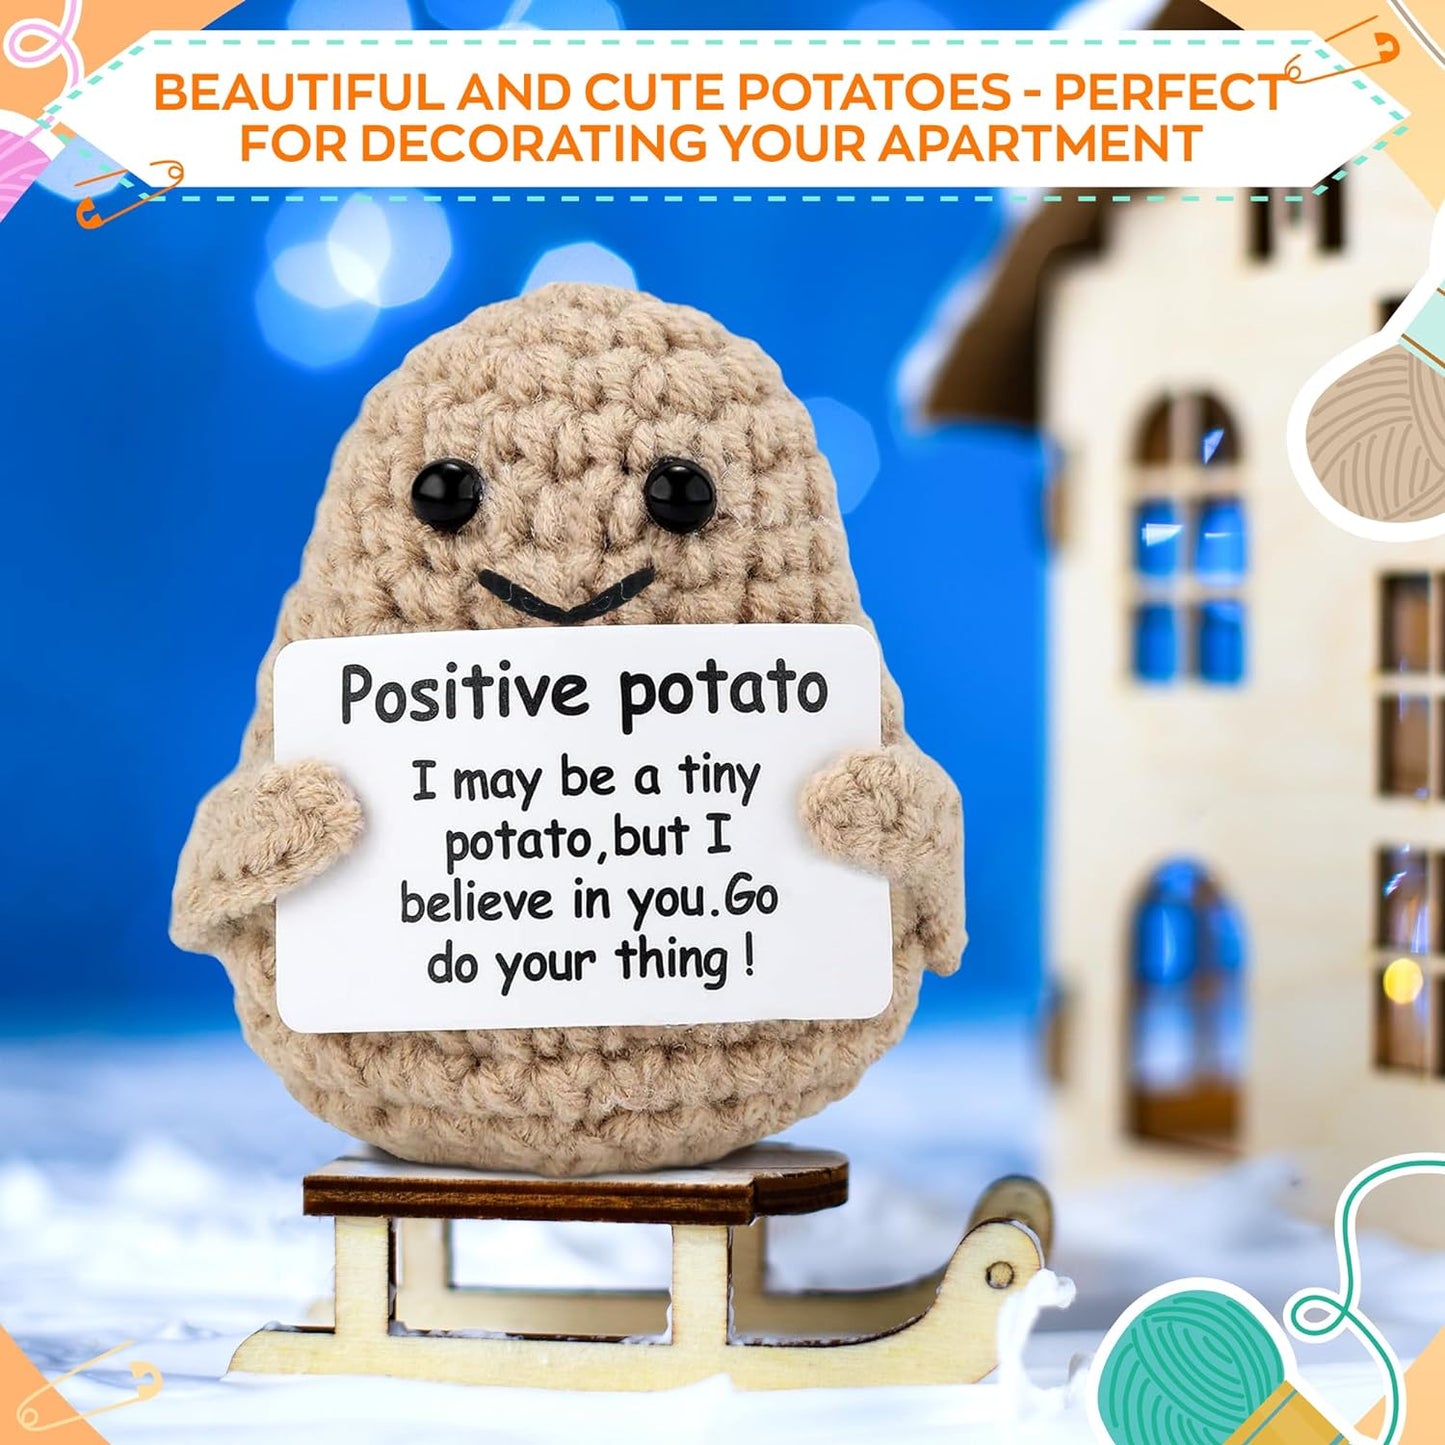 Funny Positive Potato Crochet Dolls - Cute Room Decor Knitted Toys Positive Cards Crochet Doll Emotional Support Plush Crochet Gift Home Decor Inspirational Gifts for Her Unique Birthday Gifts for Men